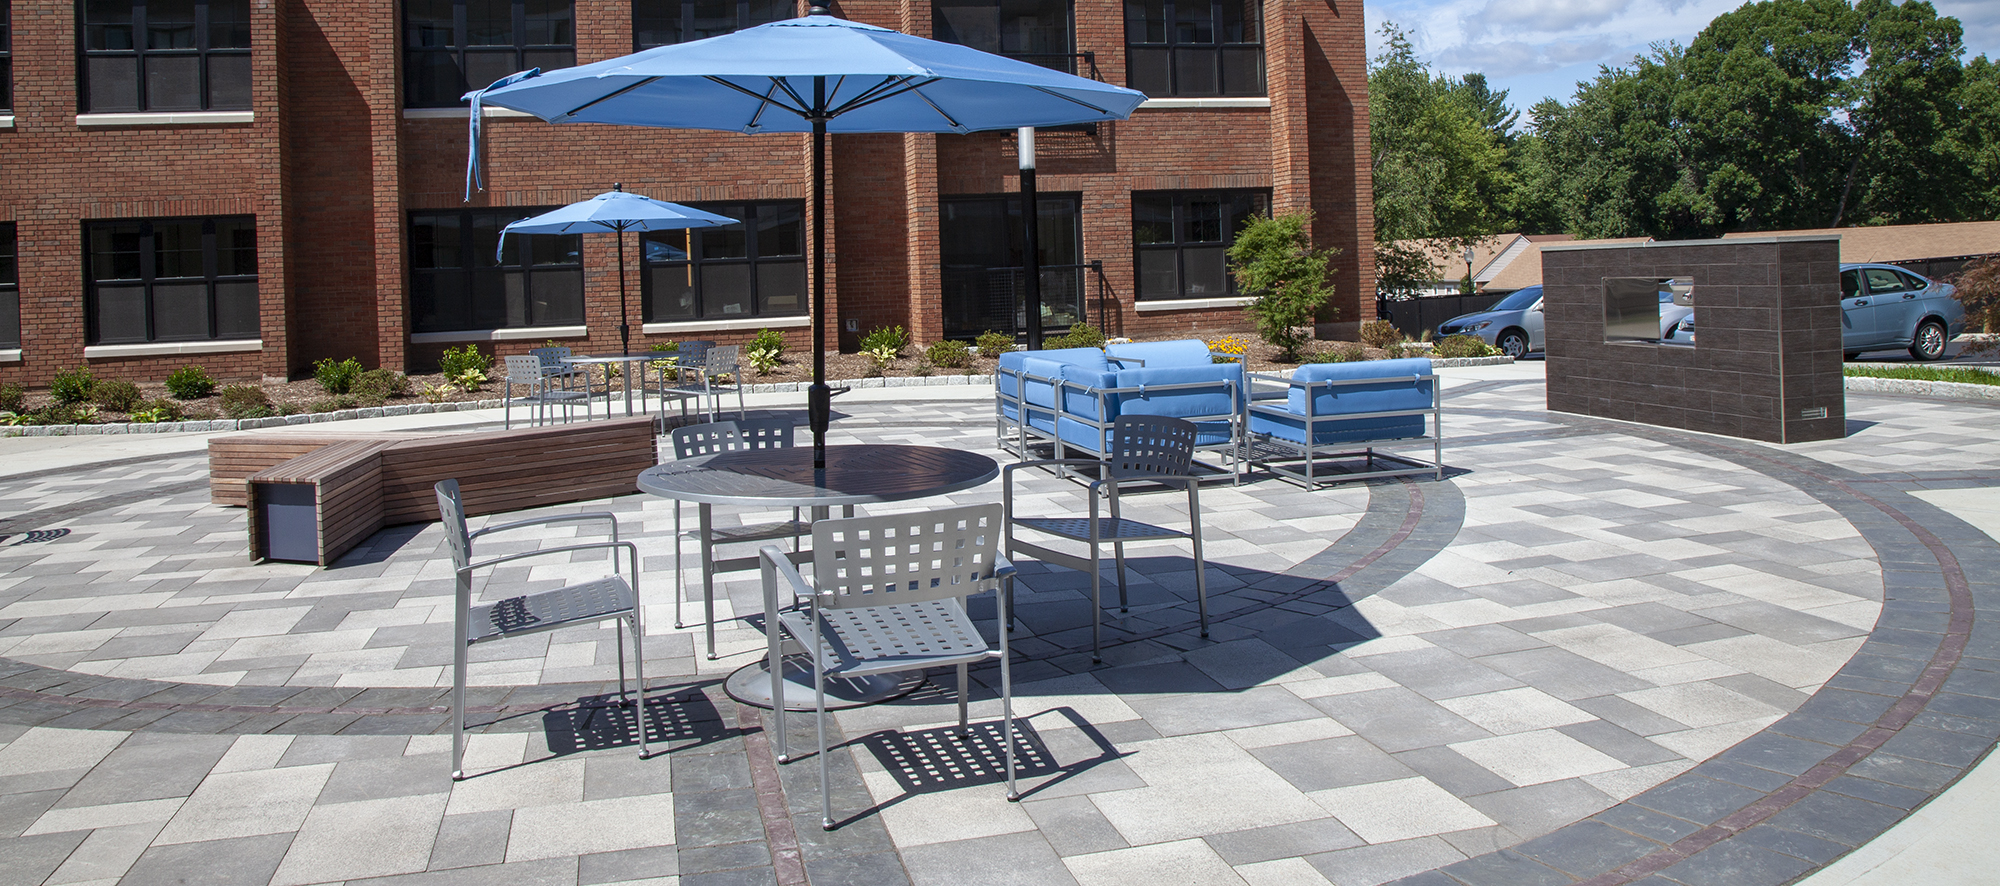 An apartment complex has an outdoor amenity space of Umbriano pavers with contrasting circular patterns of Copthorne and Richcliff.